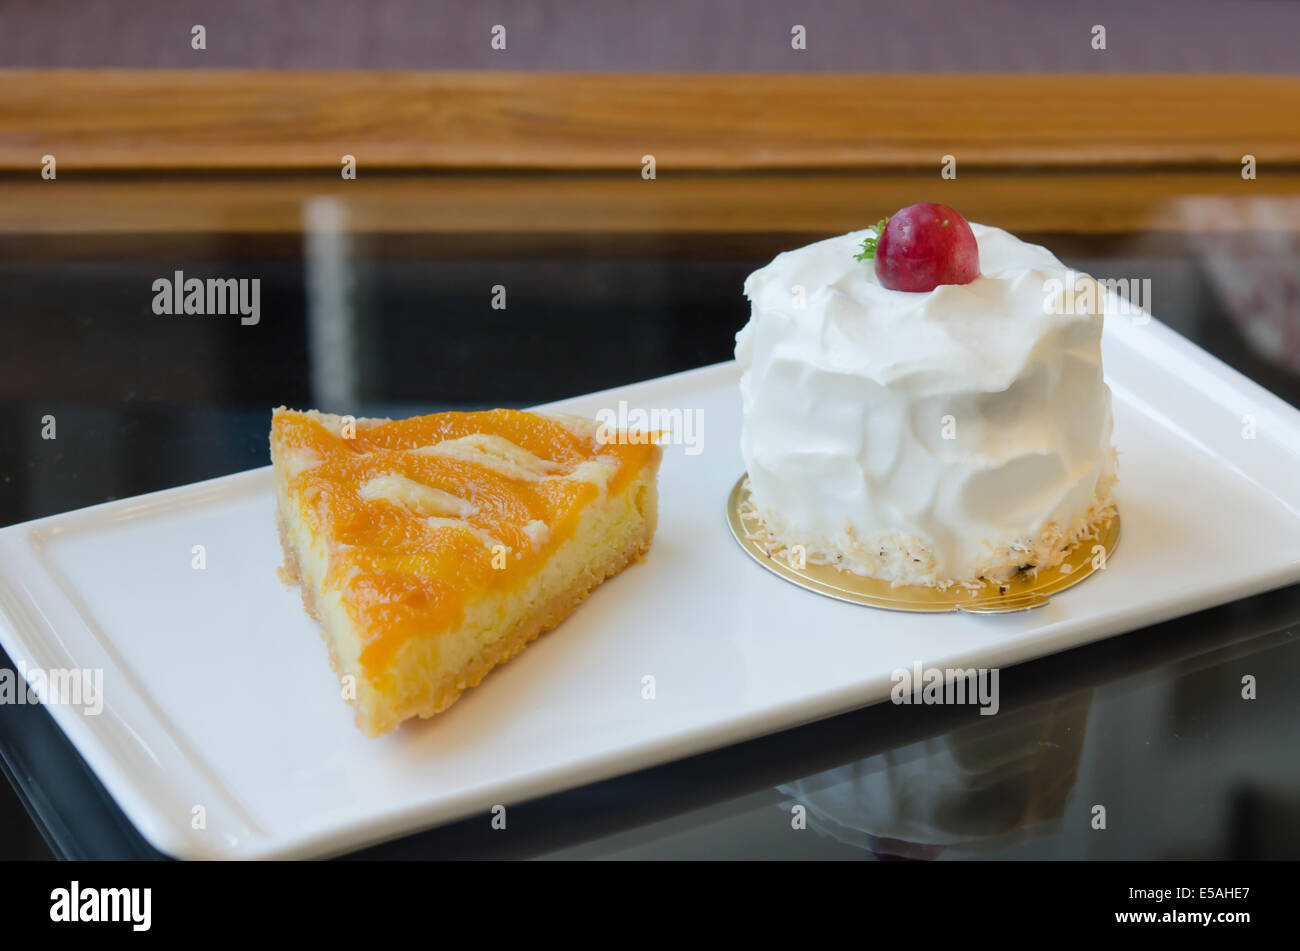 young coconut cake and peach tart on dish Stock Photo